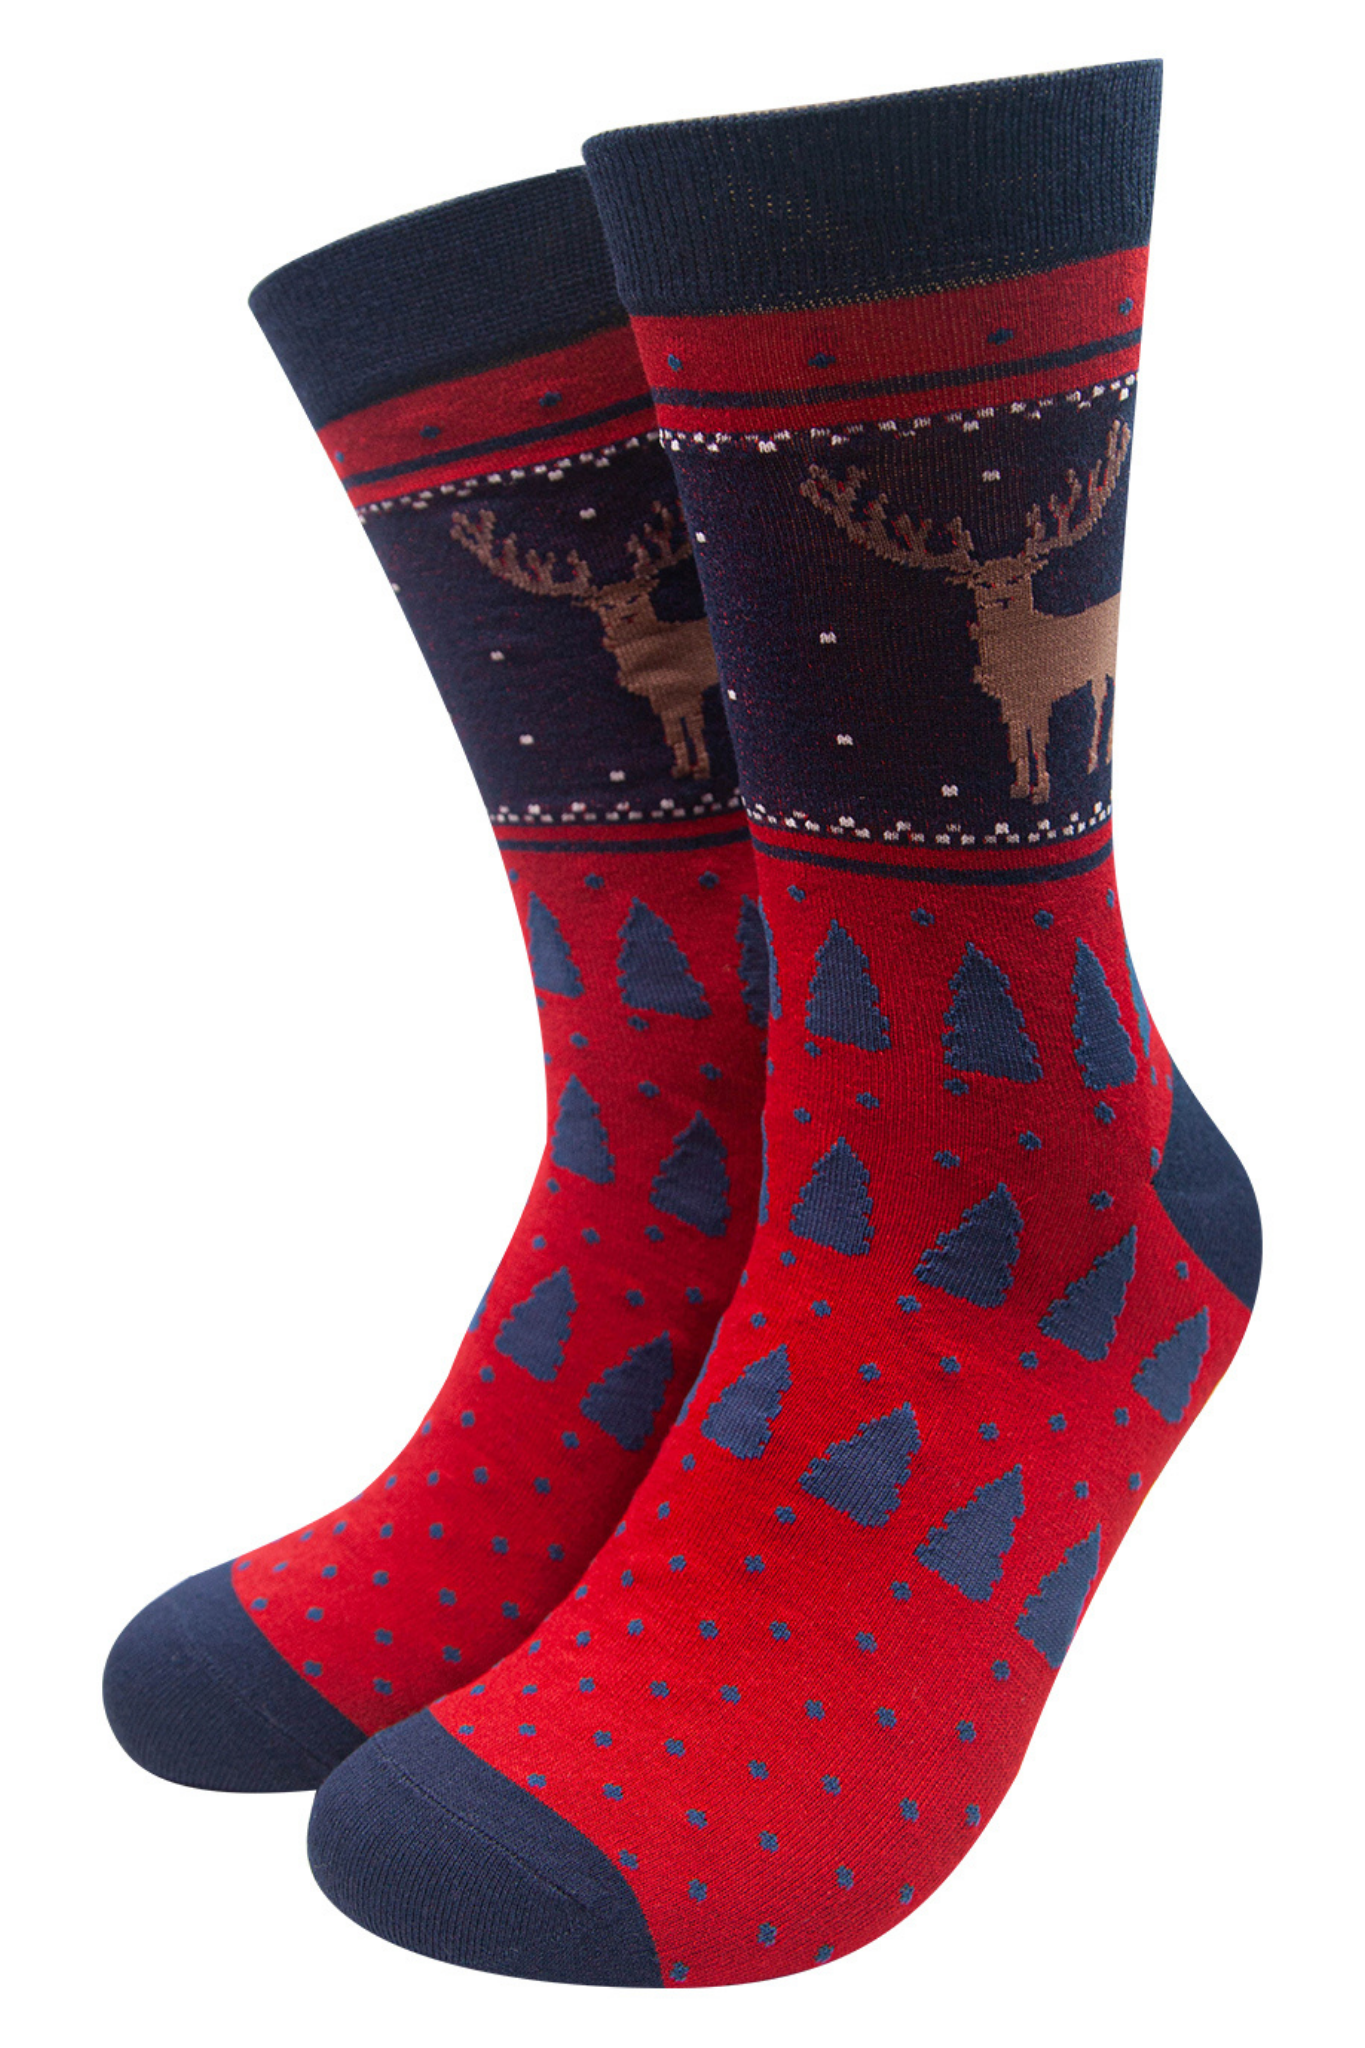 red and navy blue dress socks featuring a stag and a fair isle inspired pattern